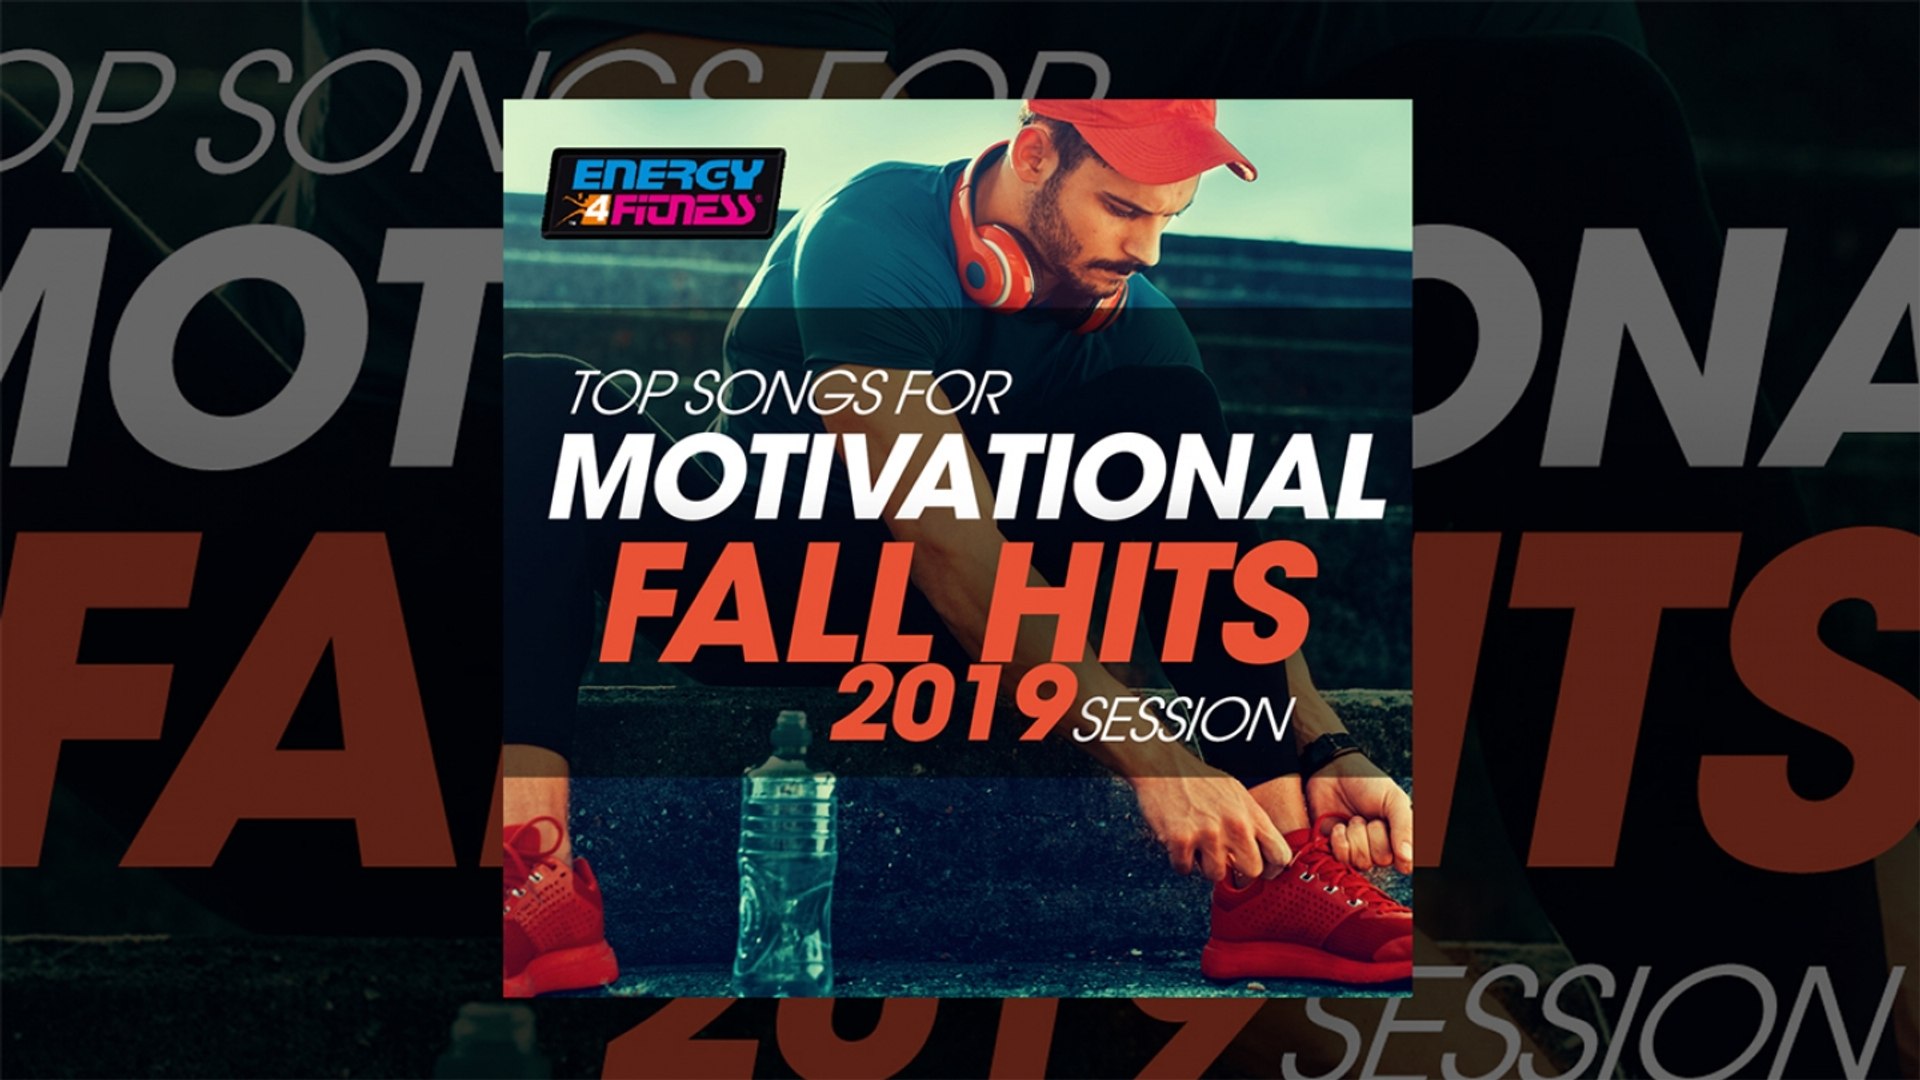 E4F - Top Songs For Motivational Fall Hits 2019 Session - Fitness & Music 2019